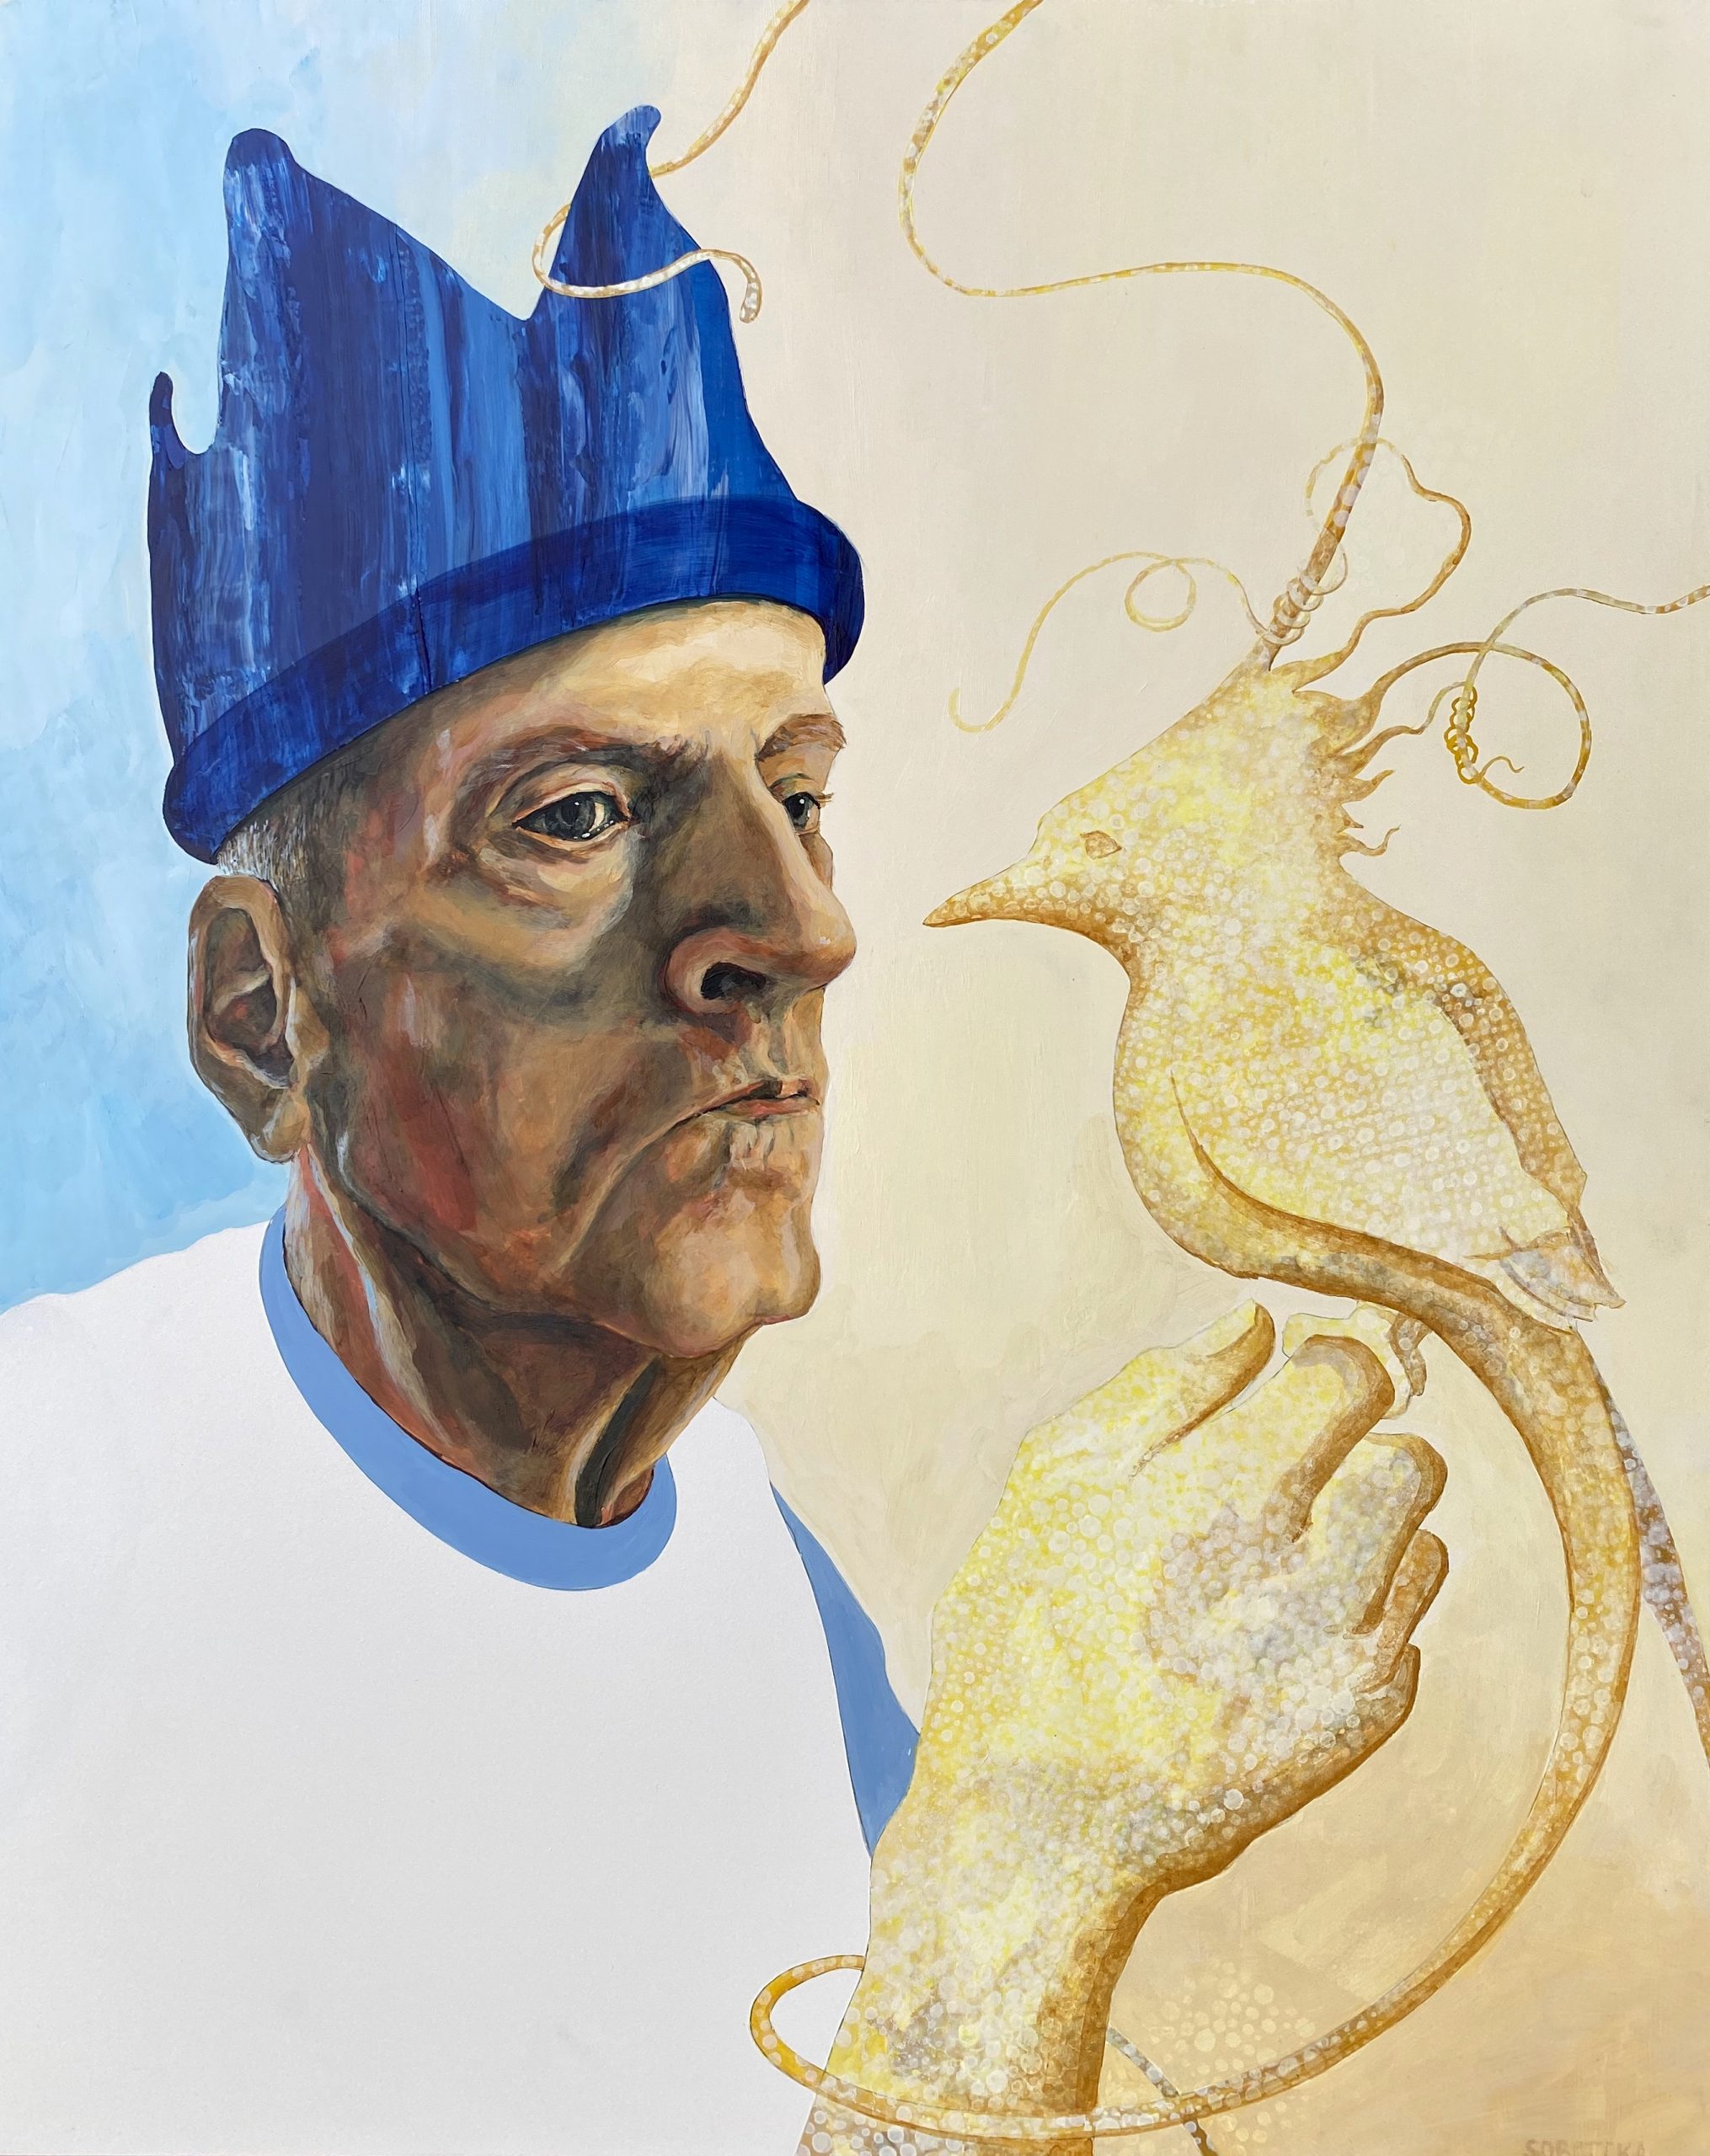 Portrait of a man with a blue crown holding up a golden bird